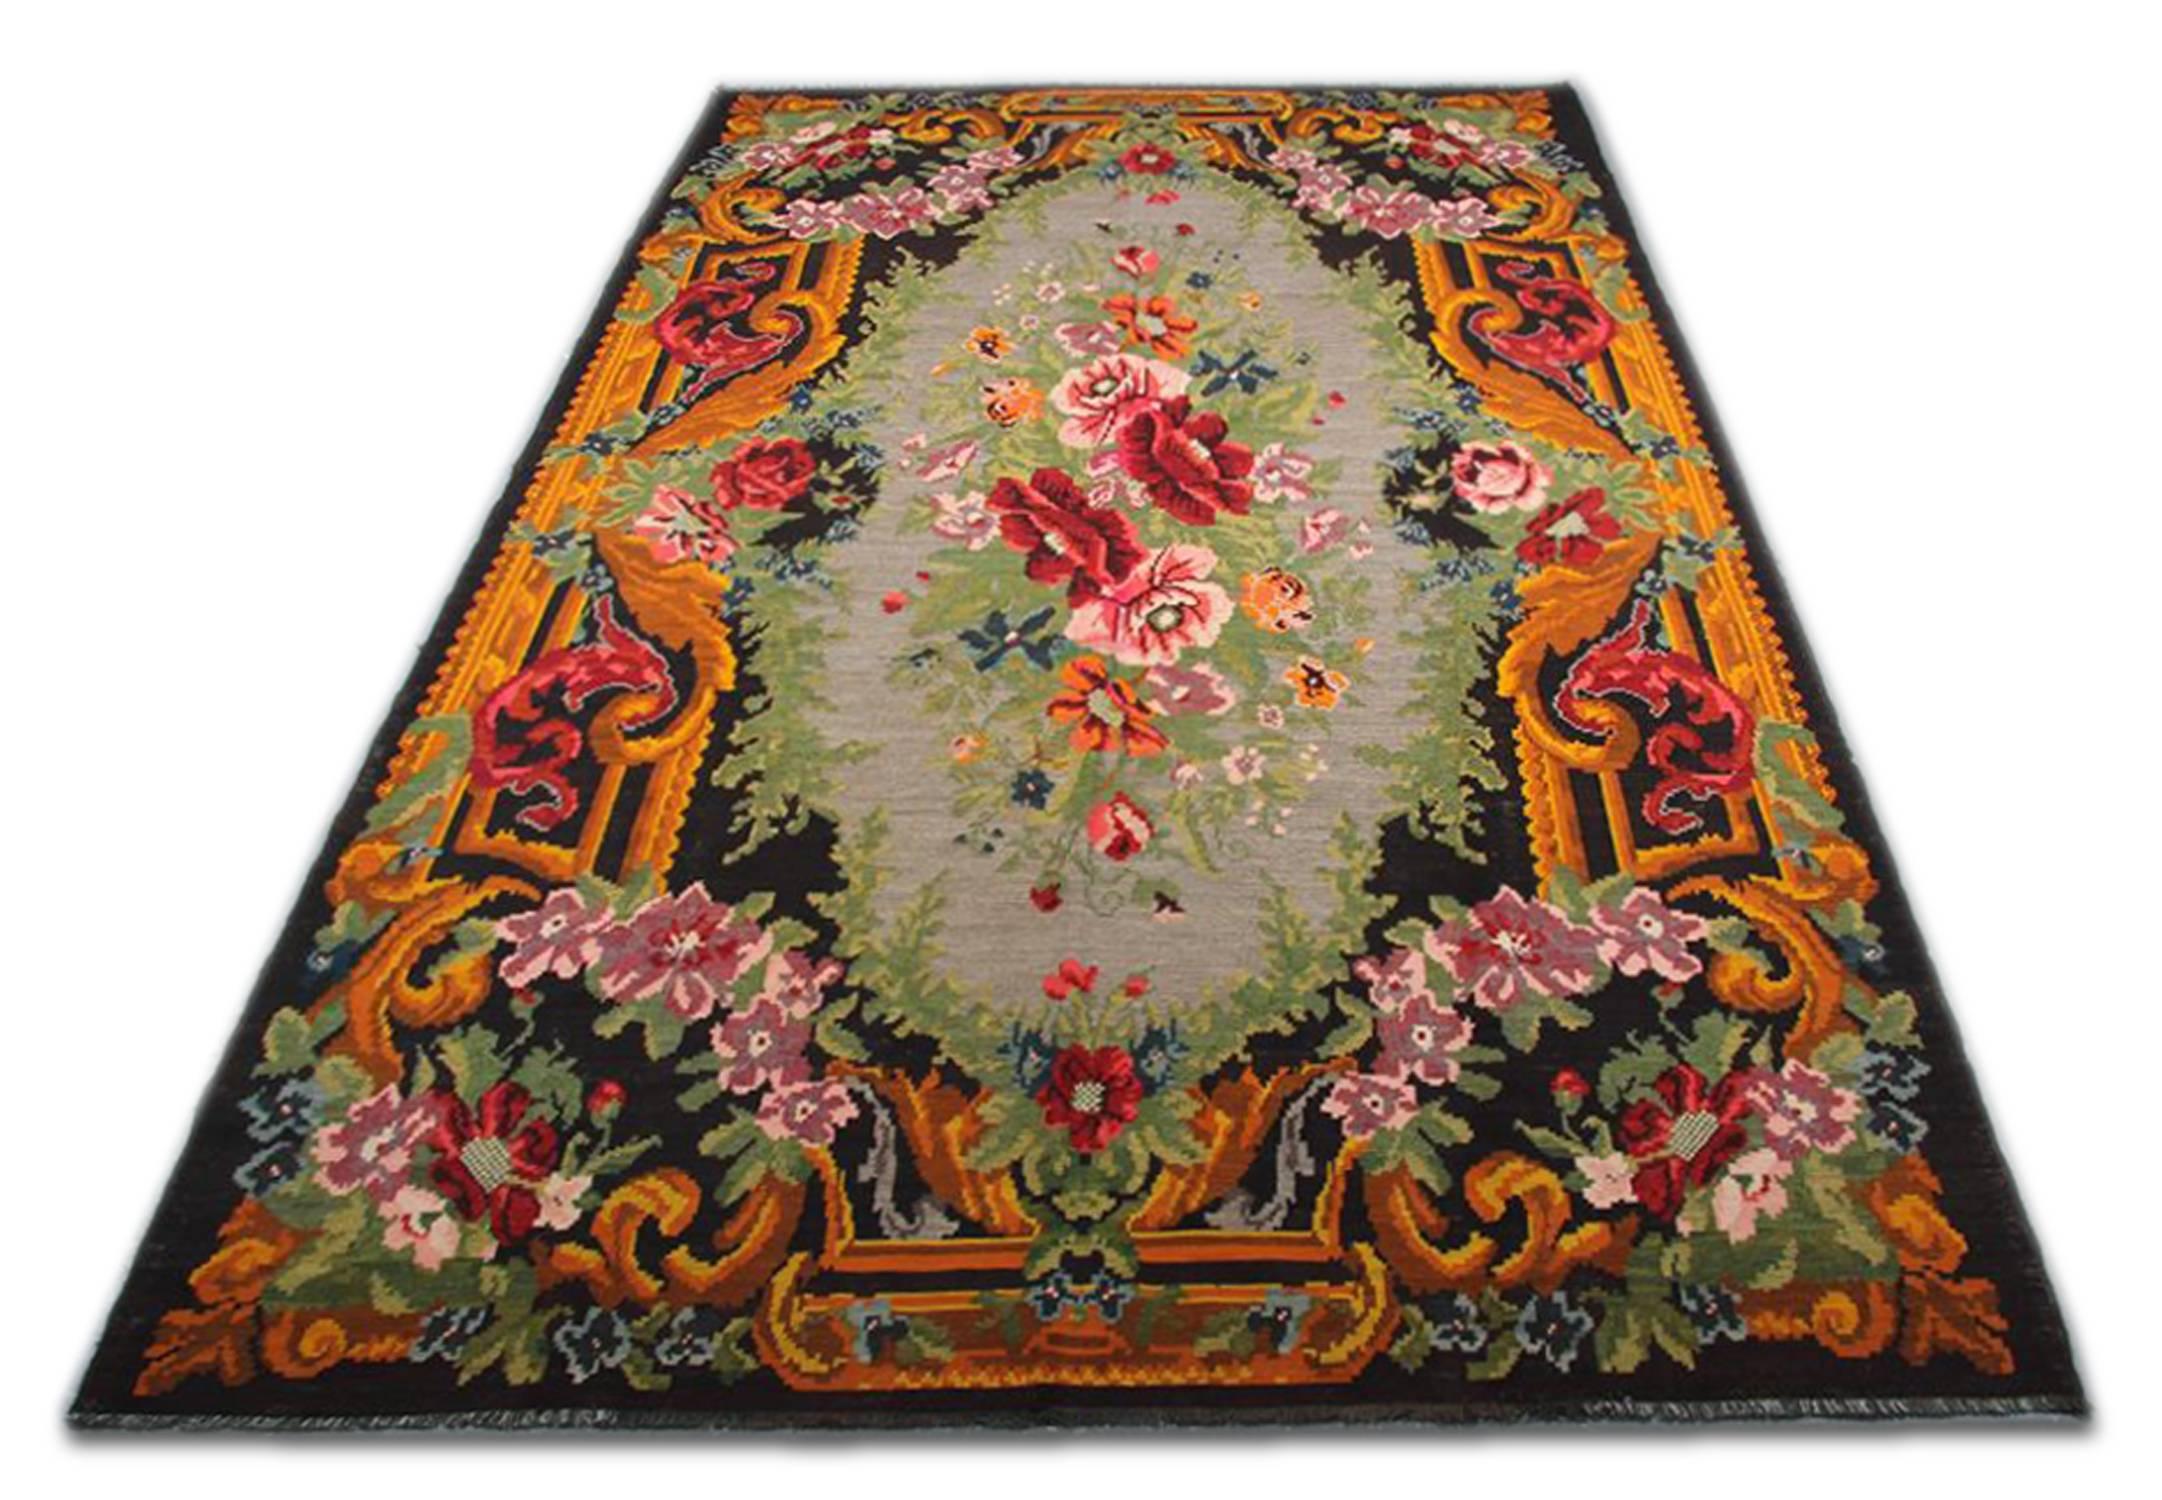 This vintage Moldovian Kilim is from Romania, handwoven in, circa the 1920s which has used unusual colour combinations.
This colourful carpet rug is woven by very skilled weavers in Moldovia, who used the highest quality wool and cotton. The